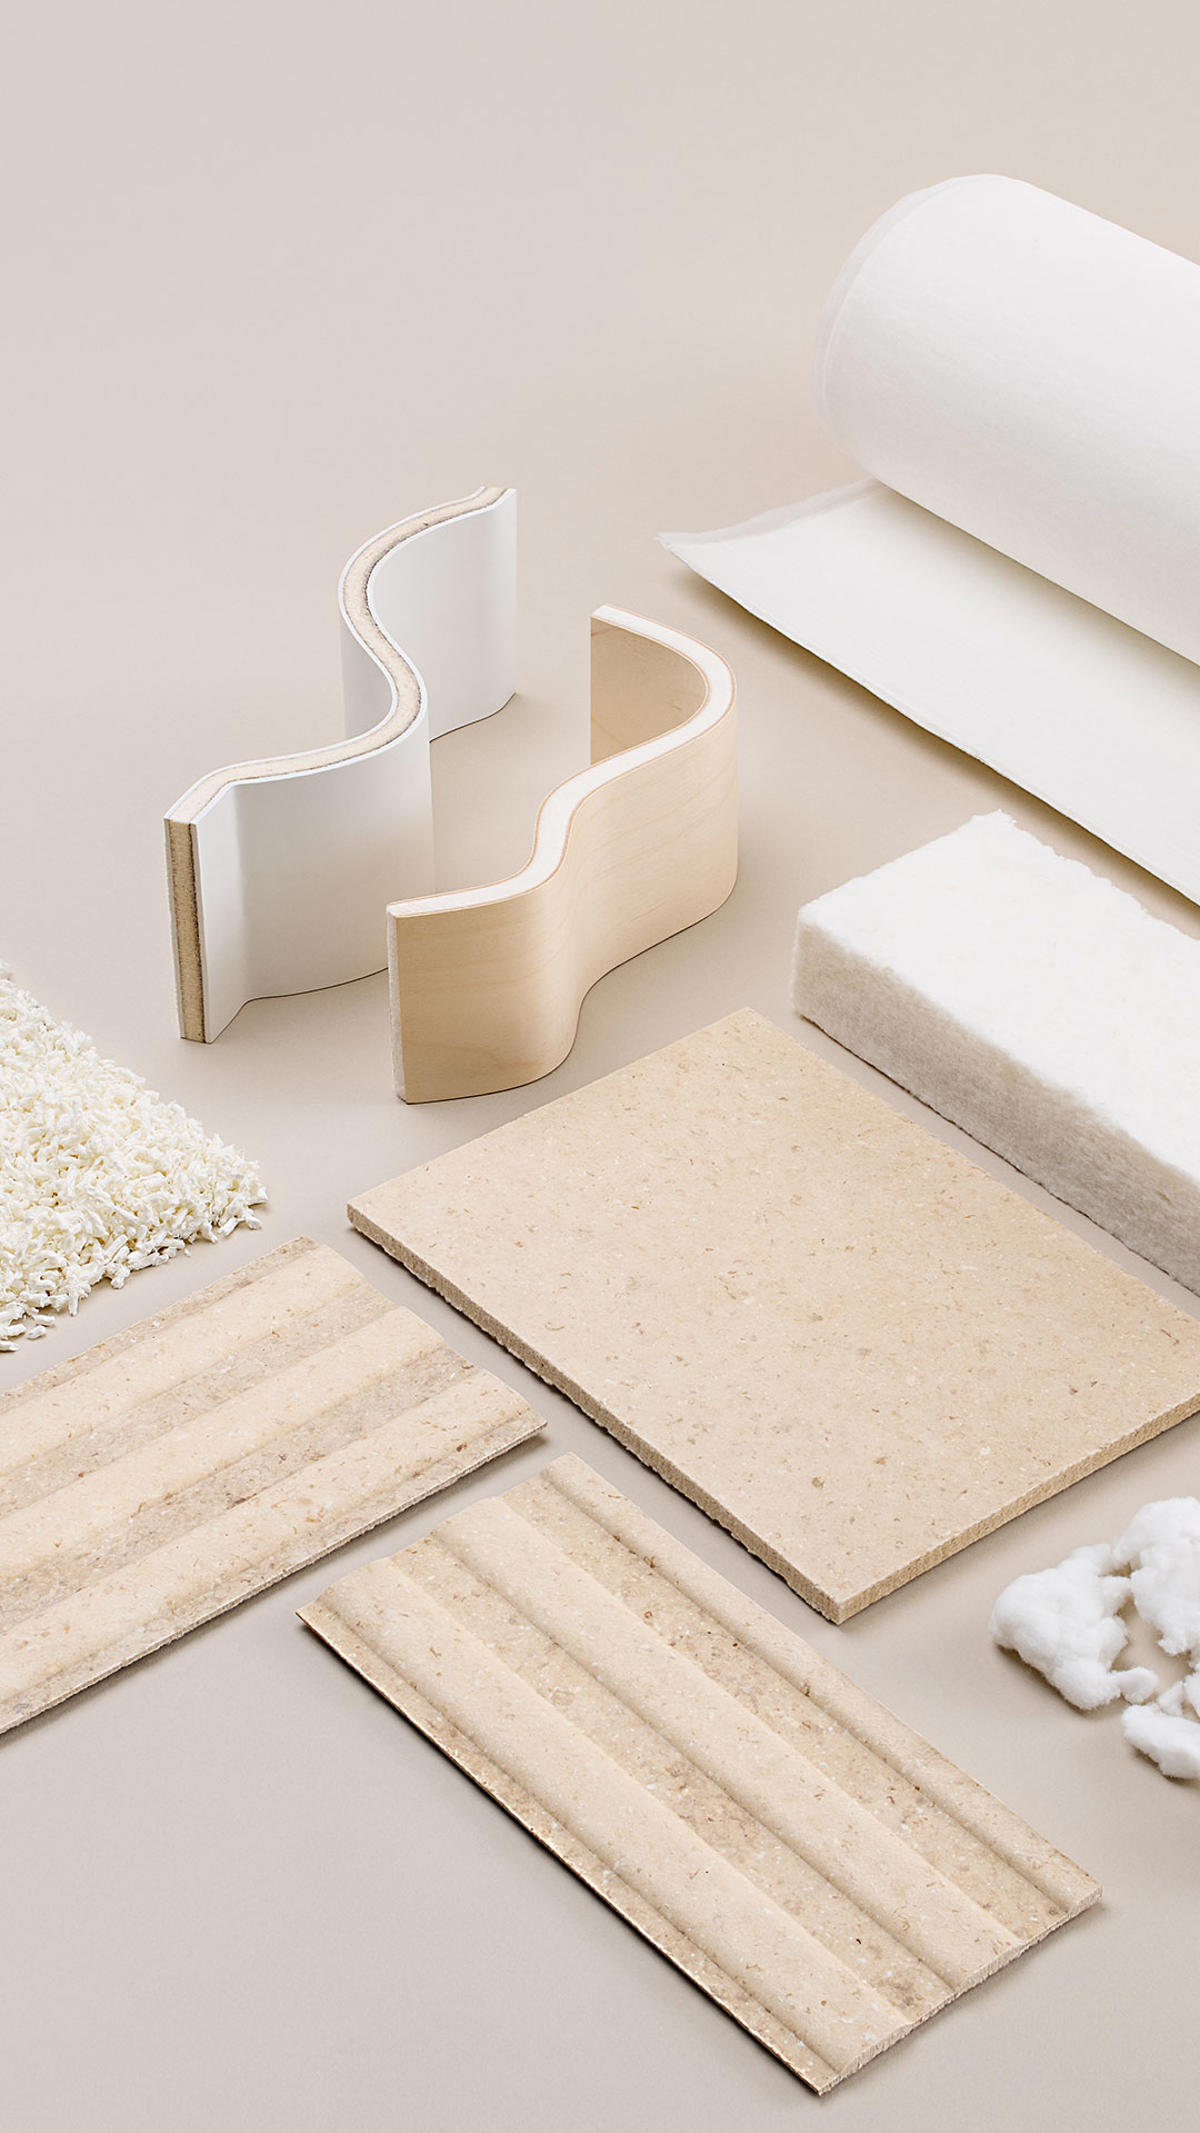 Product samples od wood-based bioproducts like pulp pellets and light fibre material